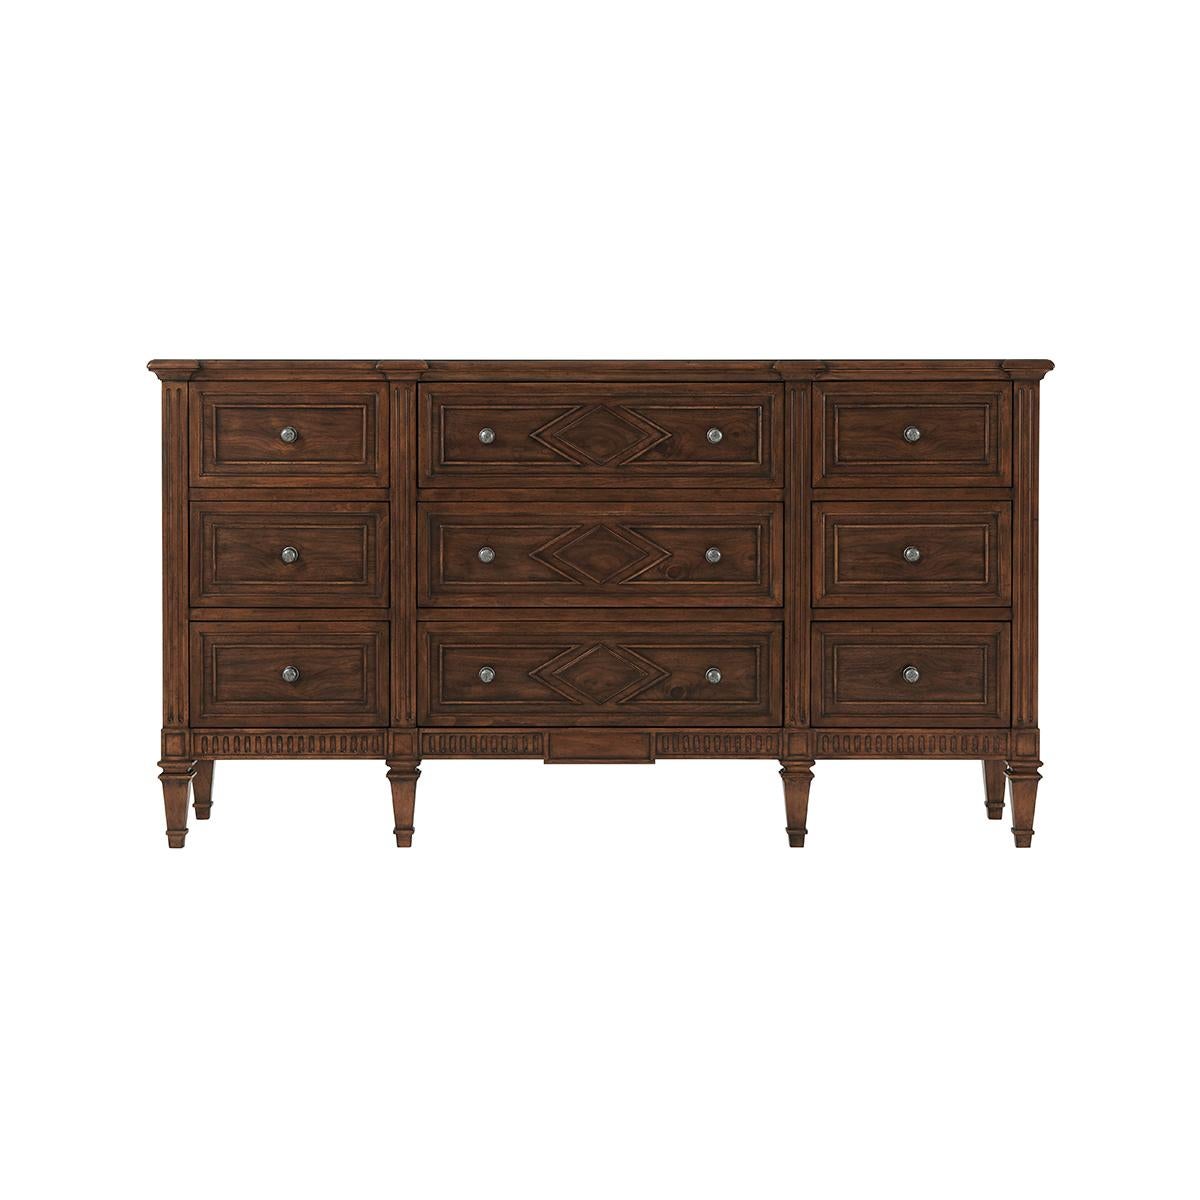 In a dark walnut finish with a molded edge rectangular top, nine paneled drawers with lozenge detailing motifs, antiqued pewter handles, with a fluted base and raised on square tapered legs. In the French Directoire style.

Dimensions: 70